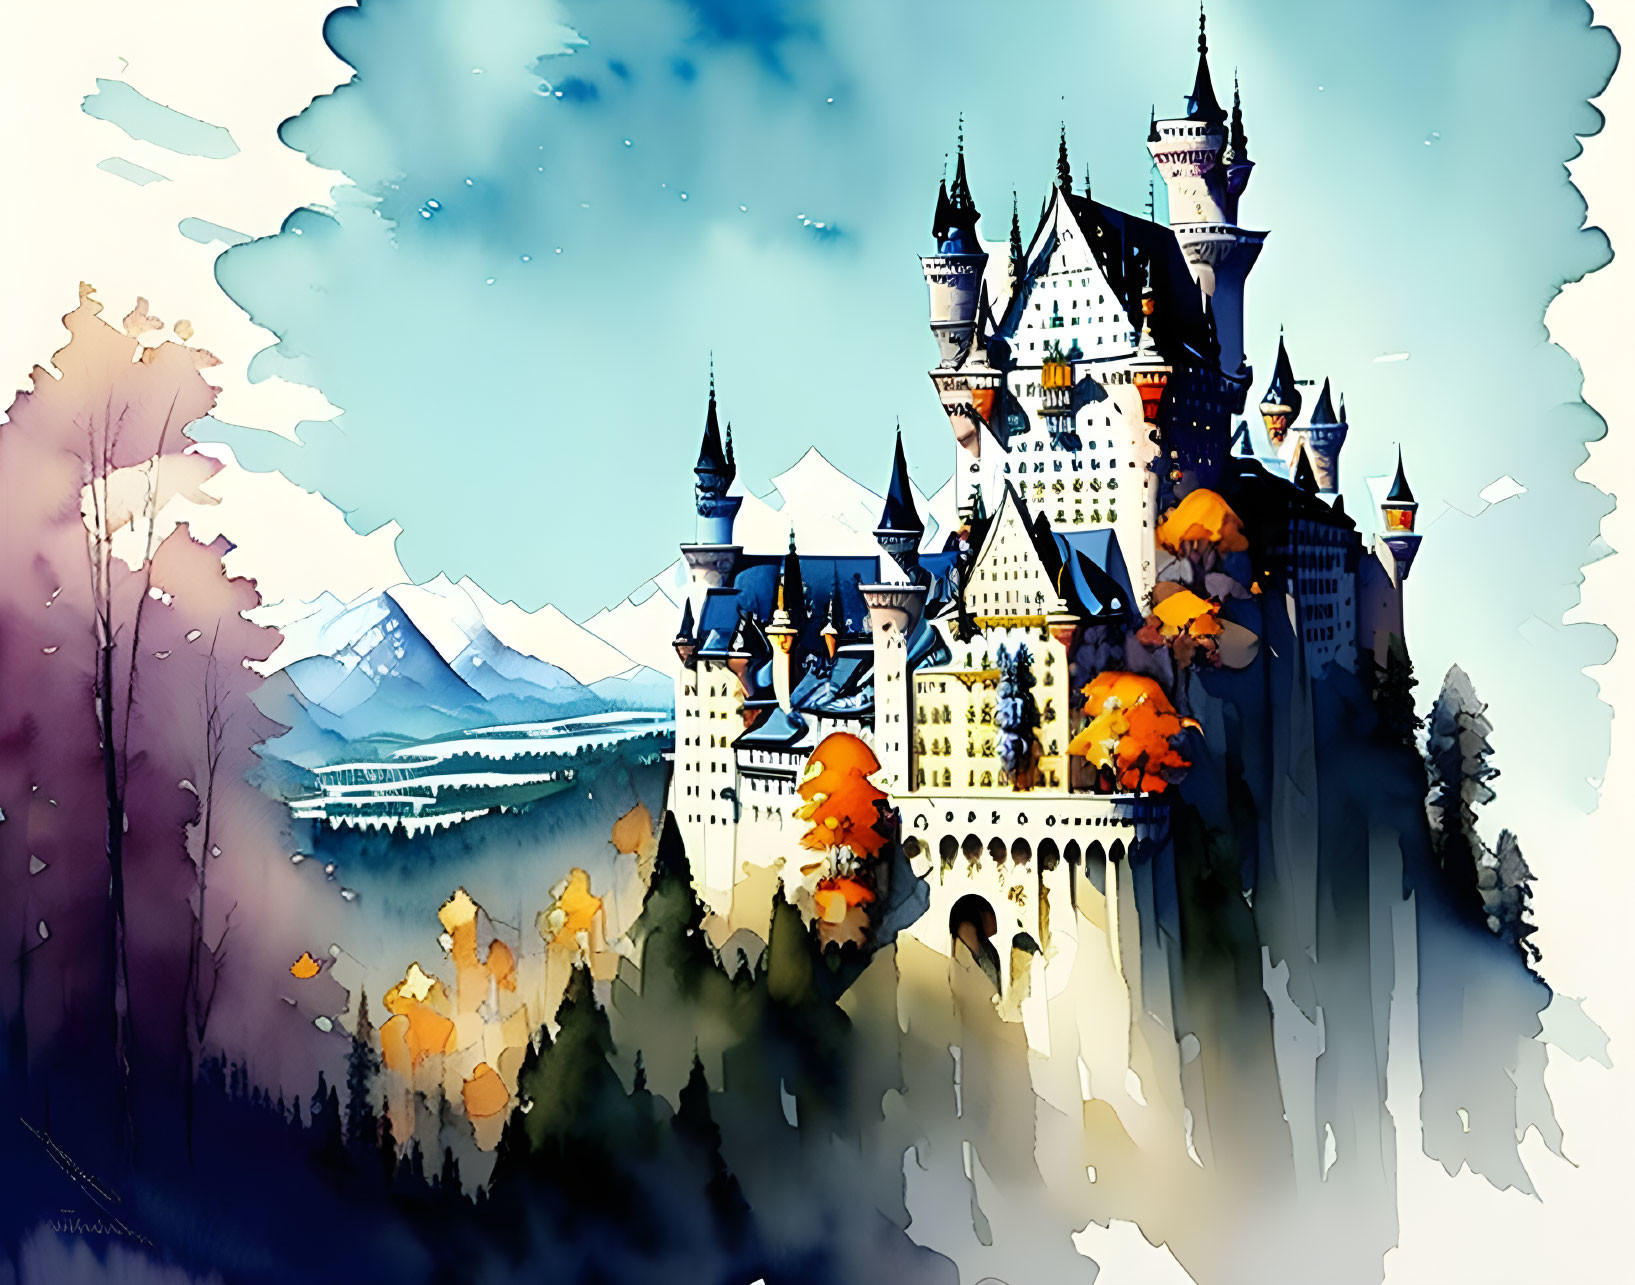 Majestic castle on cliff with autumn trees and mountains